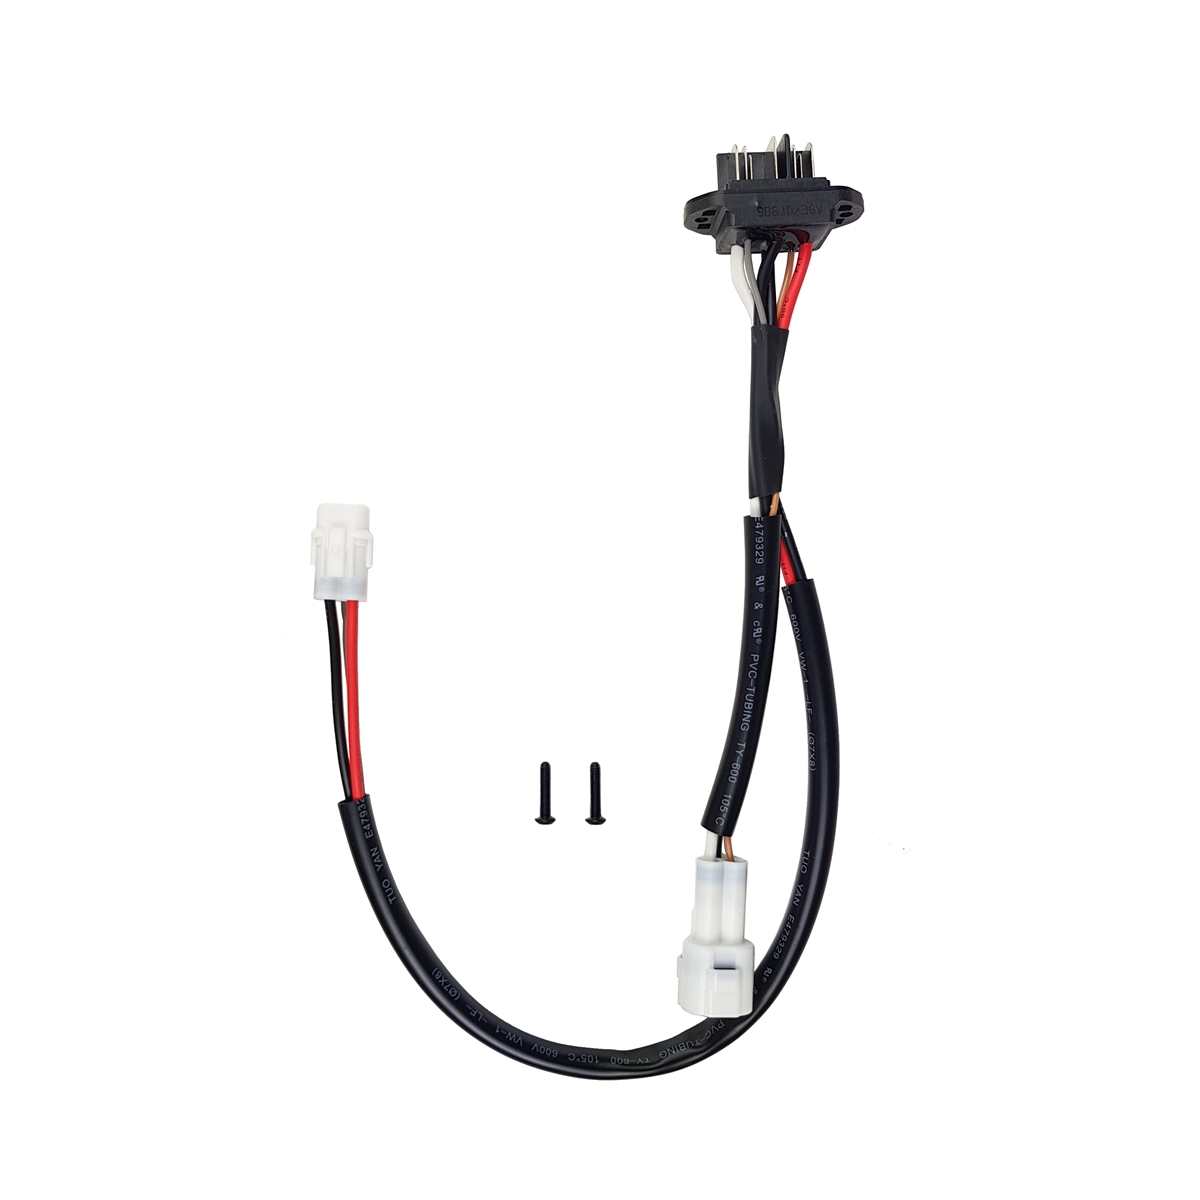 Simplo 630w motor - battery connection cable